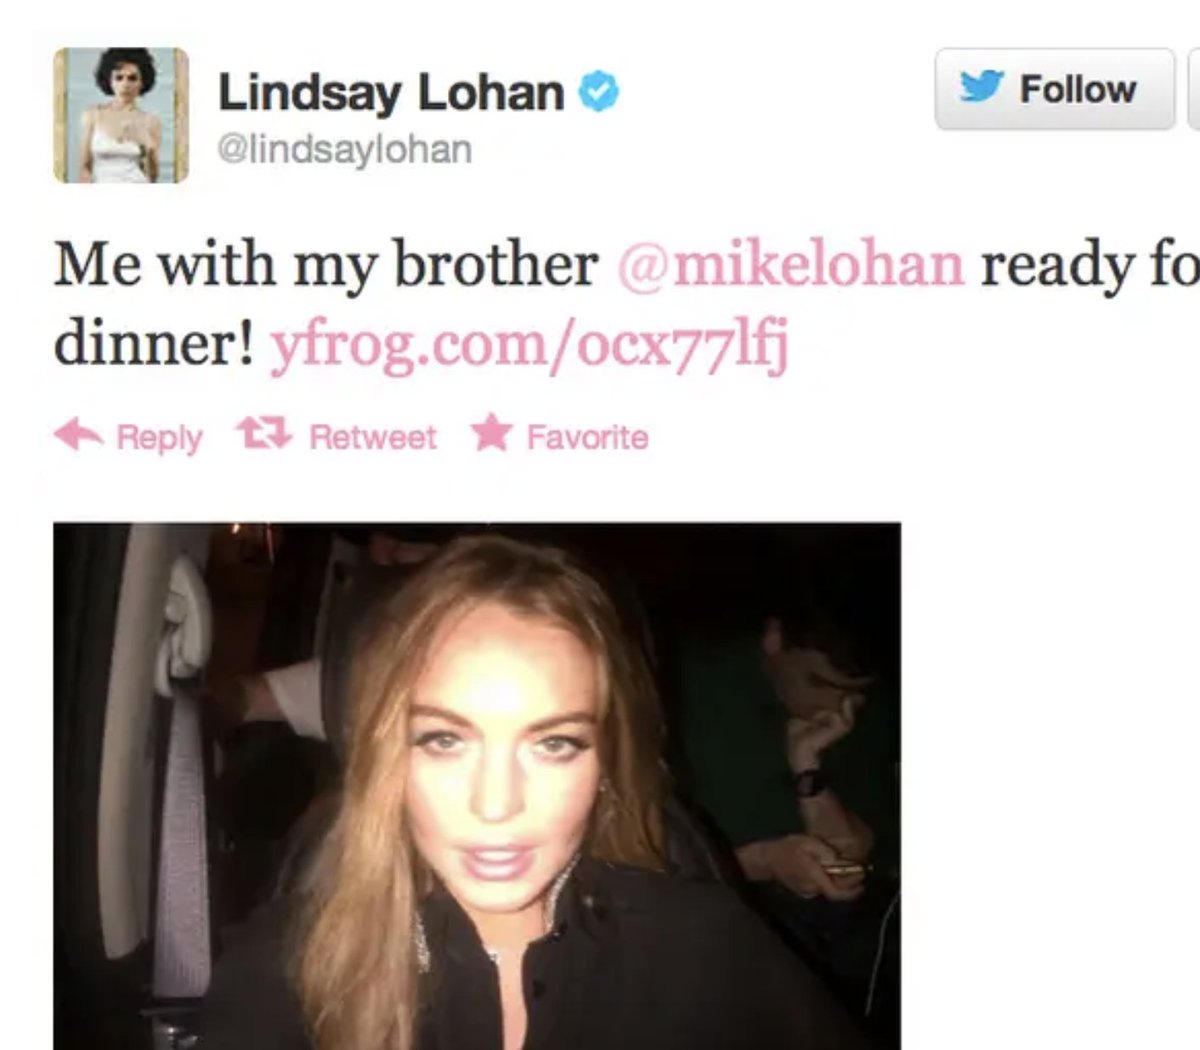 6. lindsay lohan stealing lady gaga's earrings after partying with her